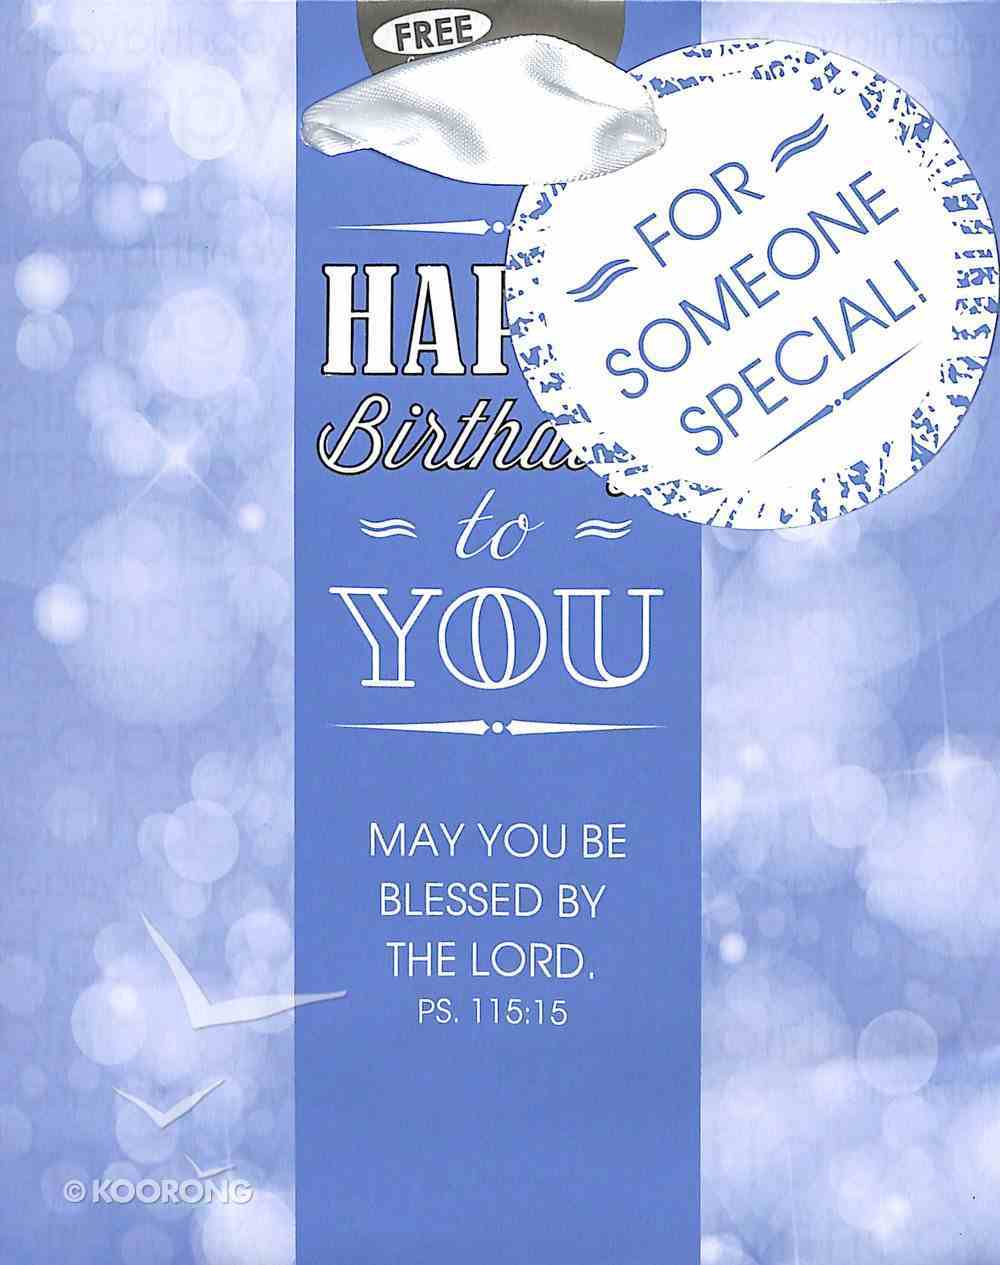 Gift Bag Small: Happy Birthday to You (Blue) Stationery